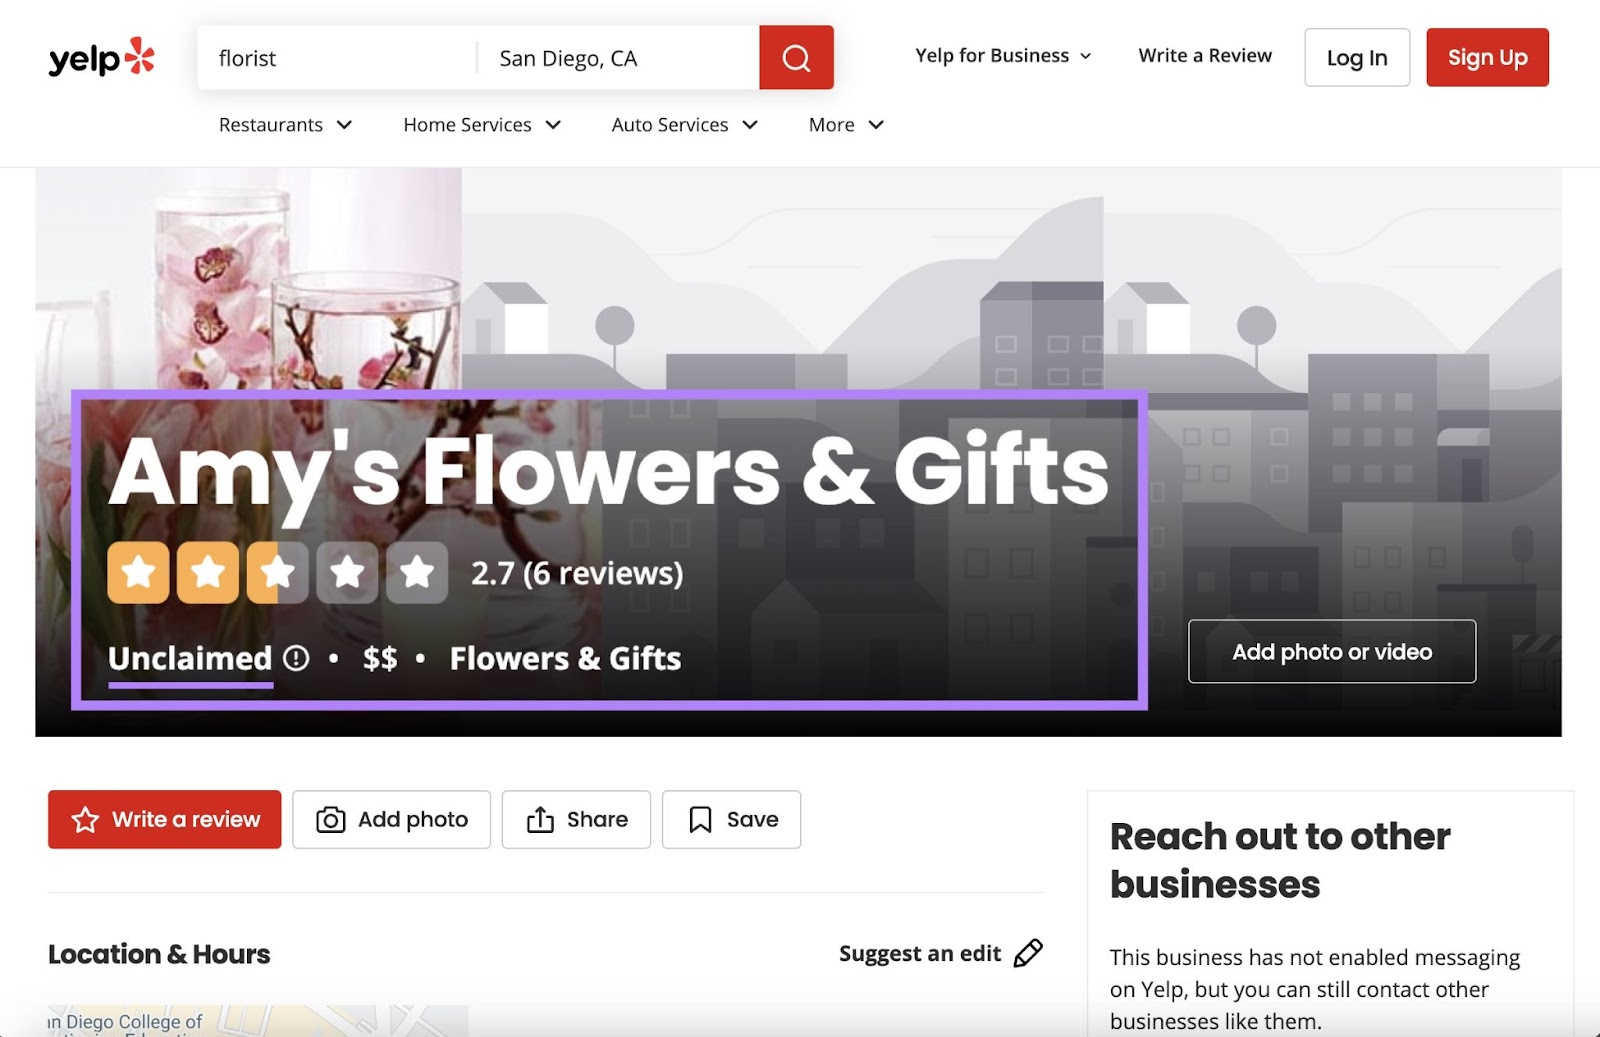 a local citation for Amy’s Flowers & Gifts on Yelp